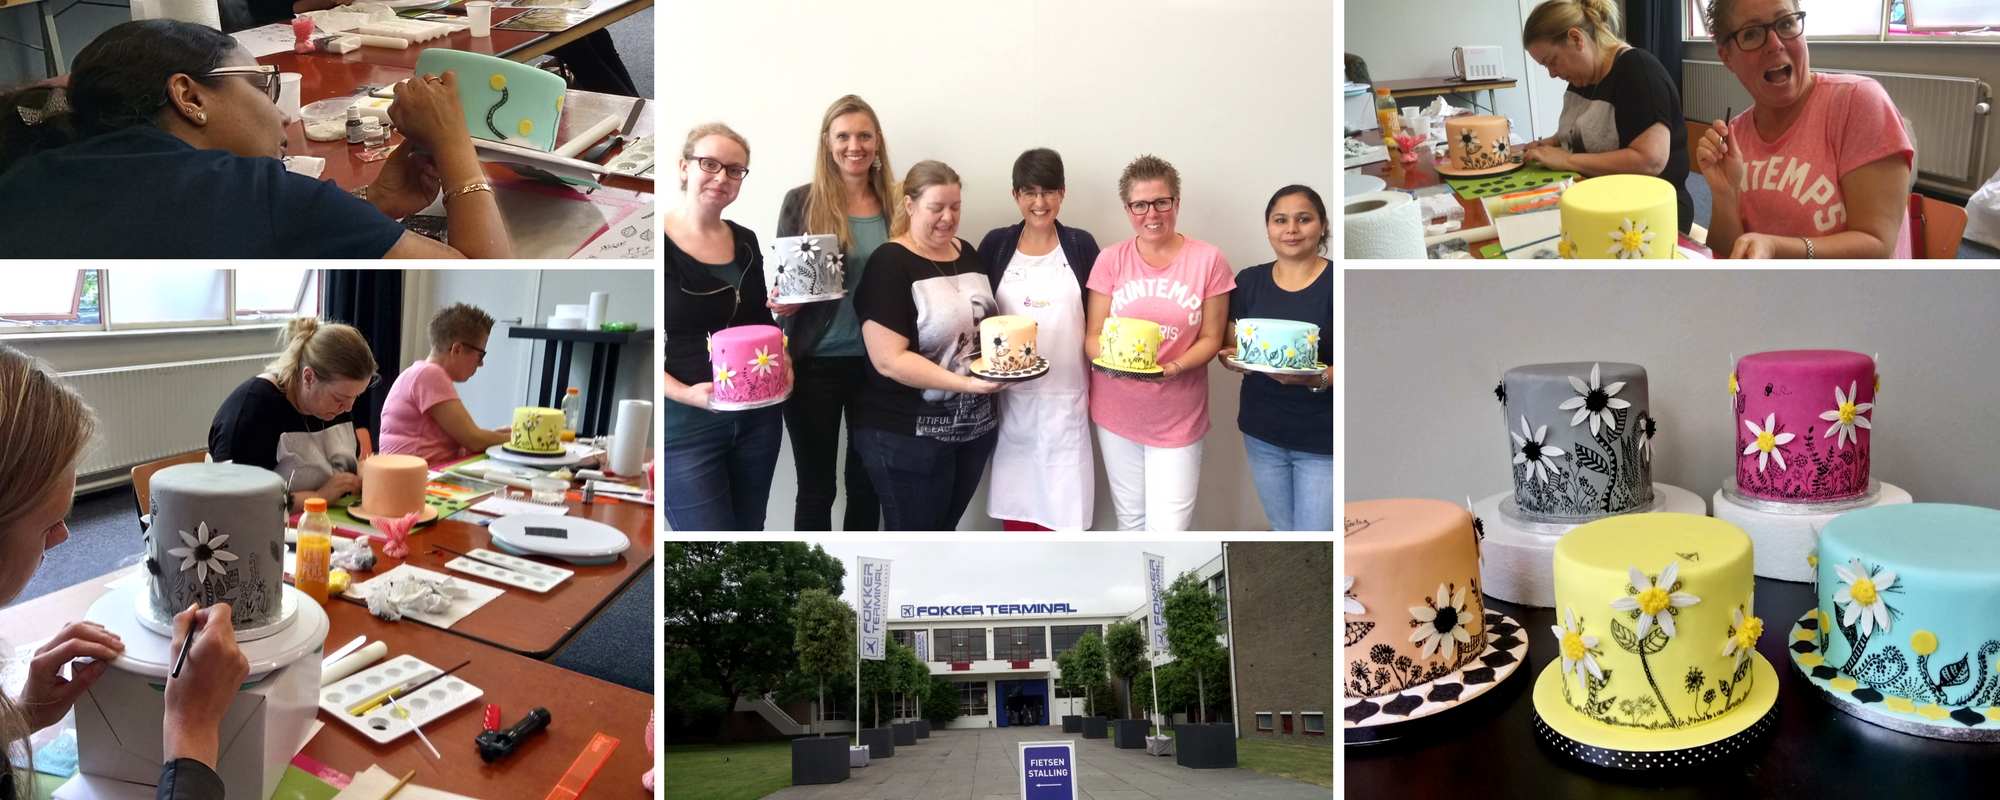 International cake decorating tutor Lindy Smith teaches in Holland at the Mjam Taart Cake & Bake Experience